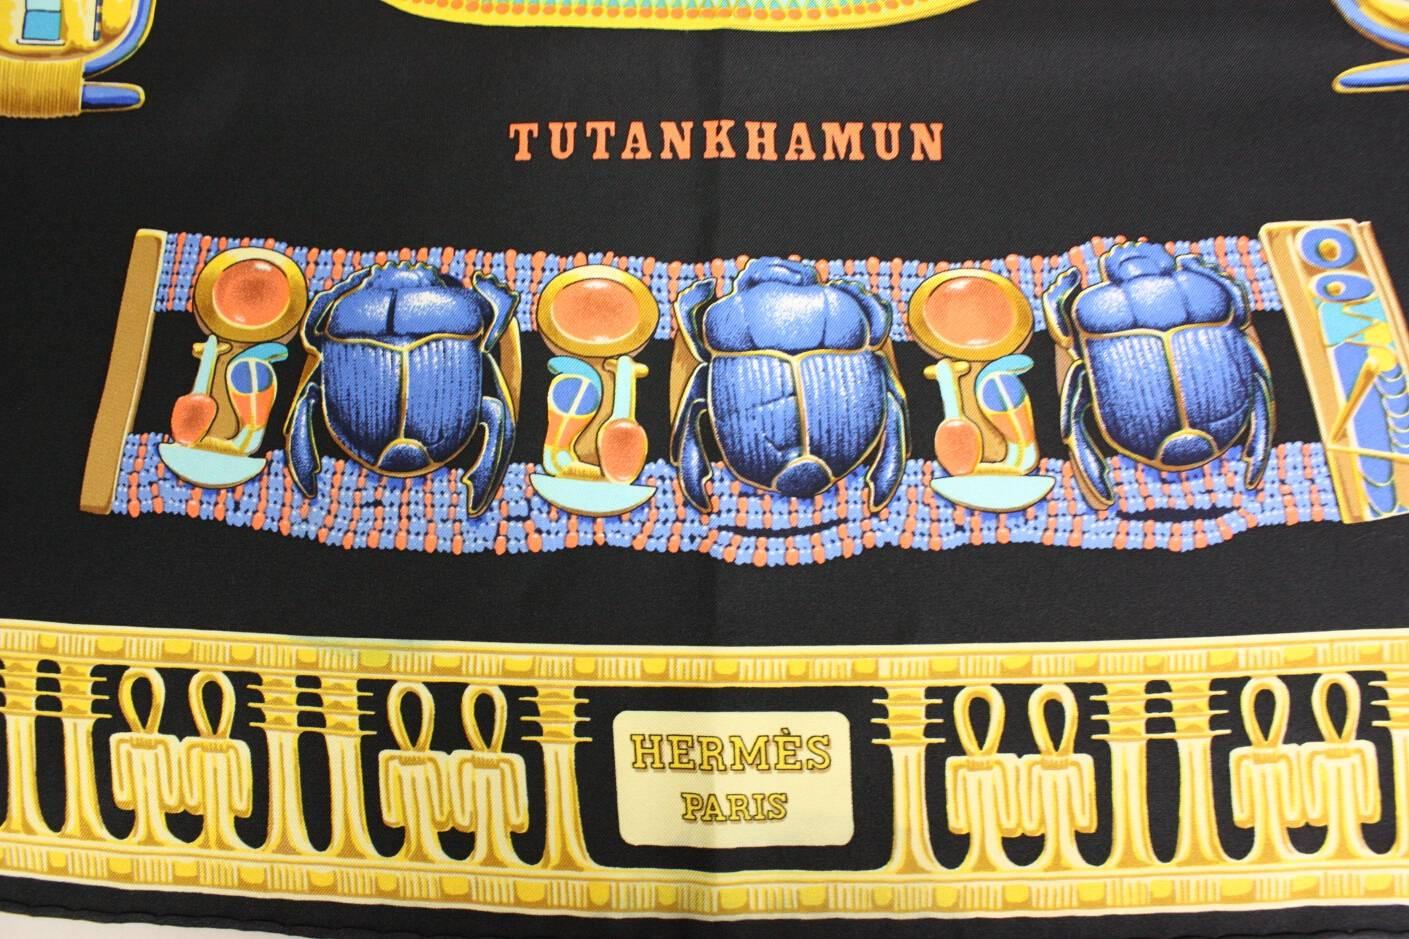 Tutankhamun scarf from Hermes is made of navy silk twill.  It was designed by Vladimir Rybaltchenko and issued in 1994 (although this could be a reprint).  Hand-rolled edges.  

It measures approx. 35